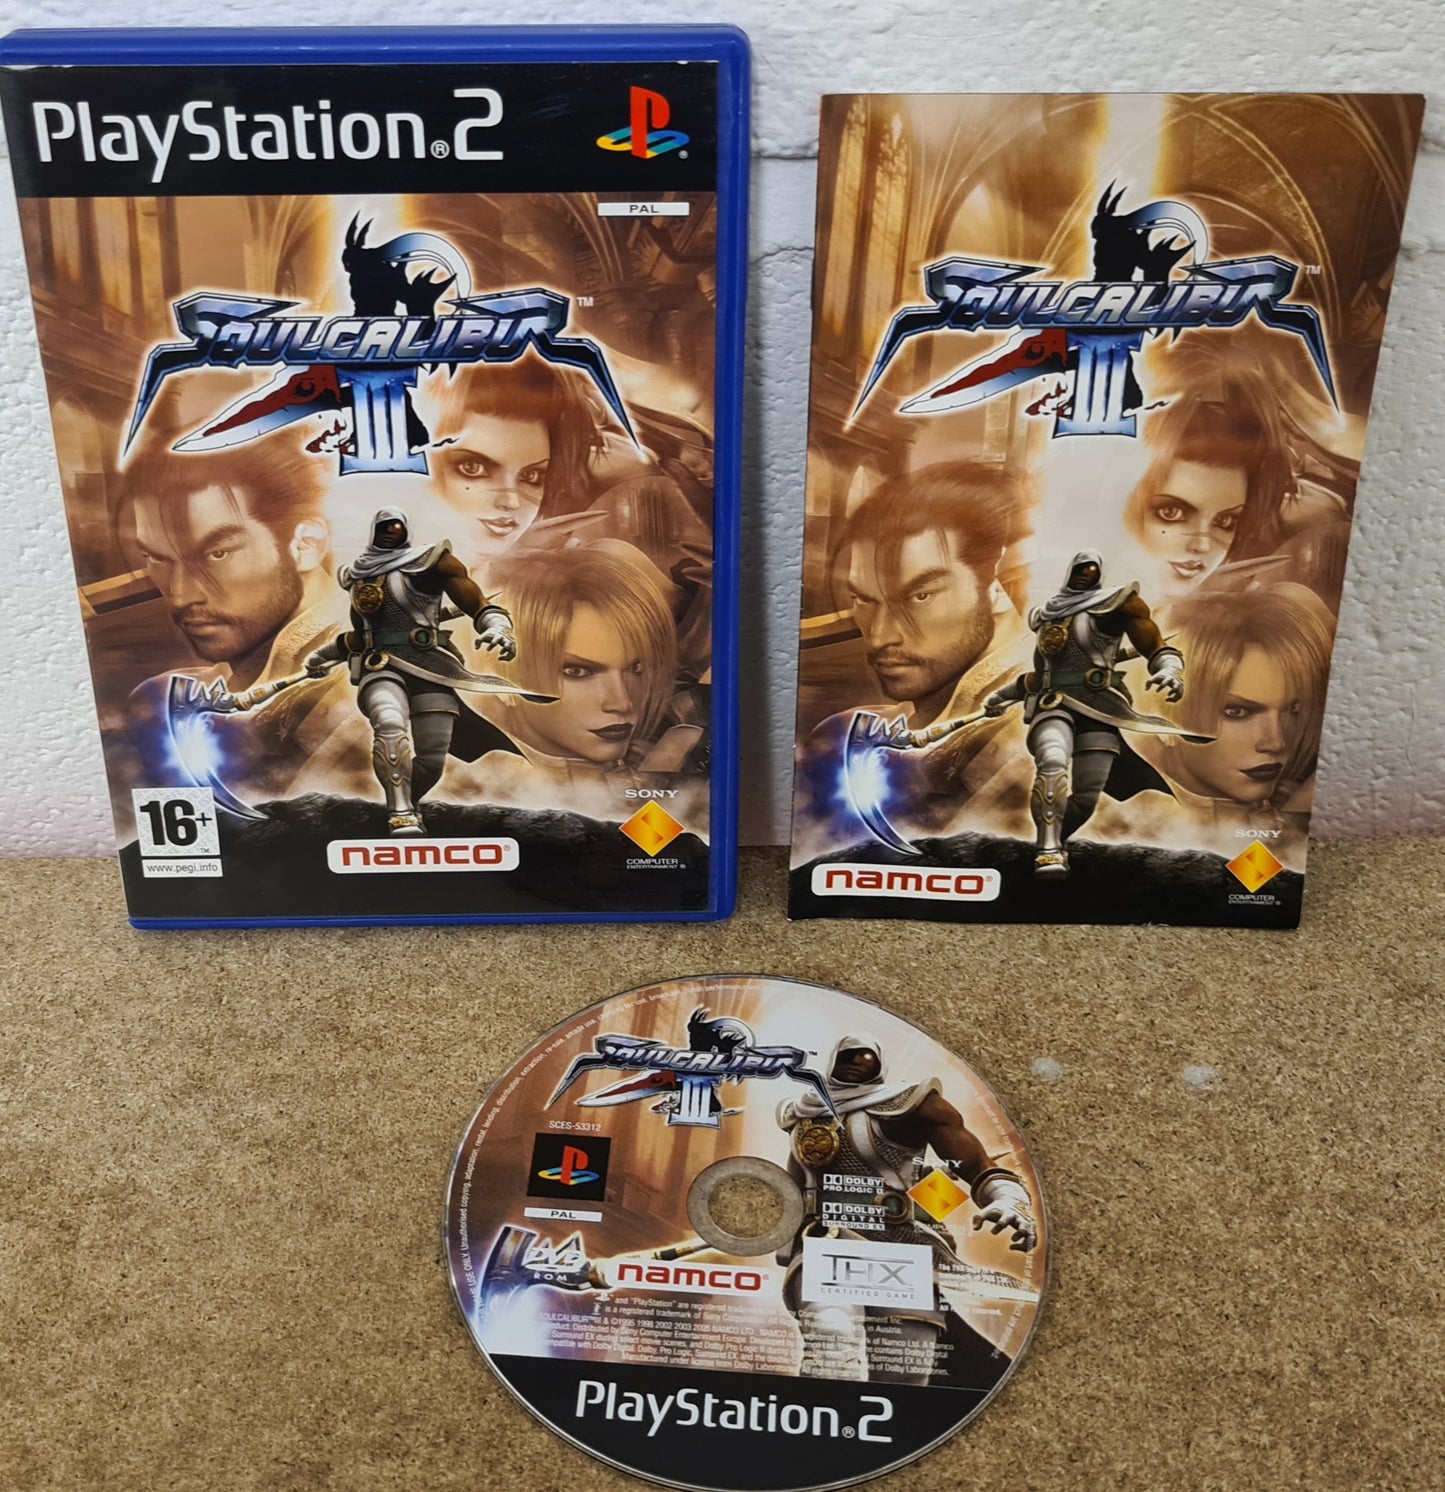 Soulcalibur III Sony Playstation 2 (PS2) Game